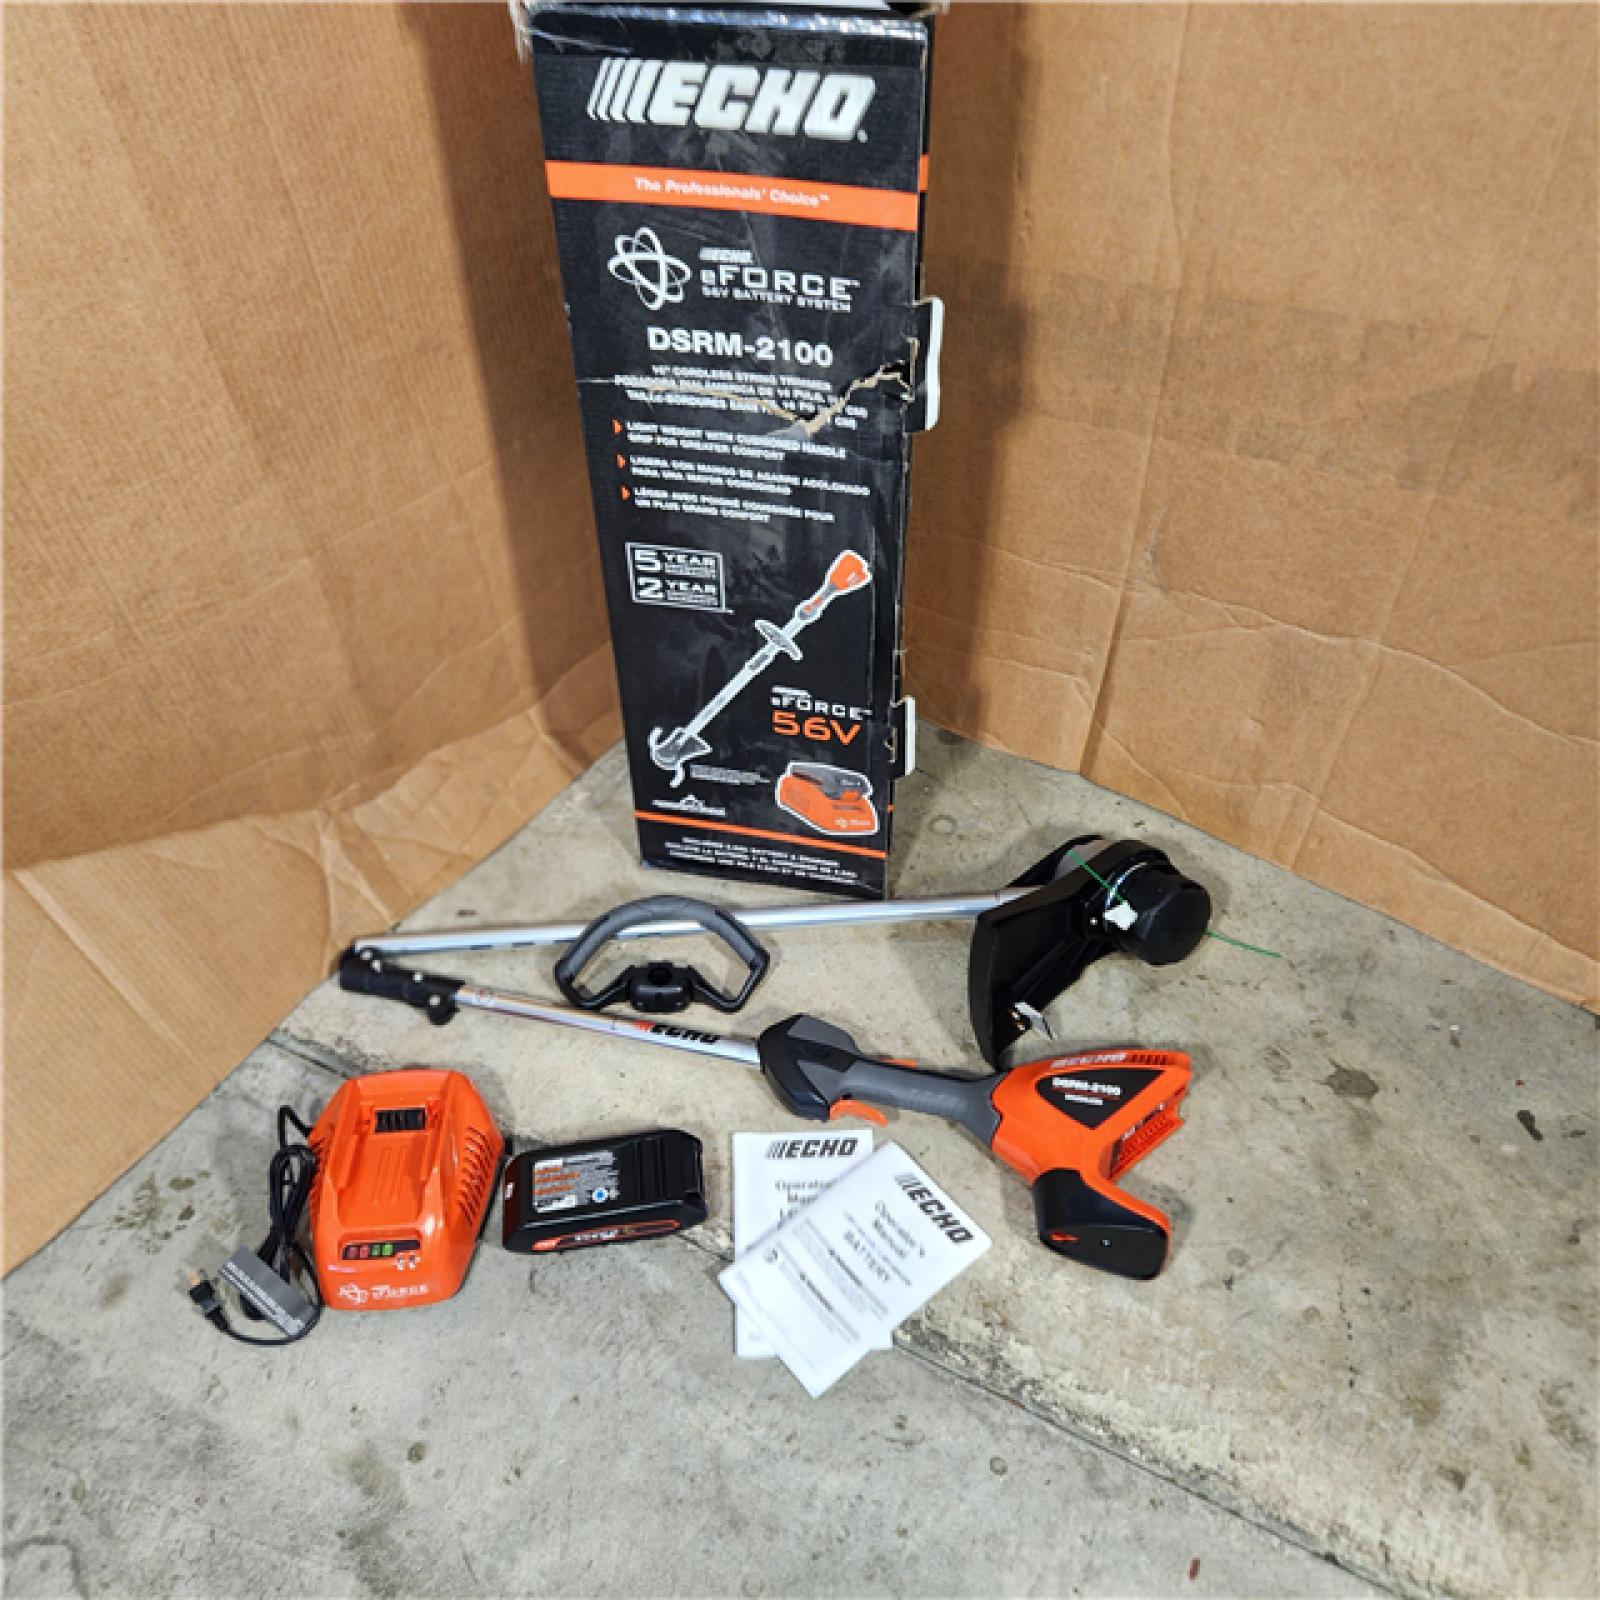 Houston location- AS-IS Echo EFORCE 56V 16 in. Brushless Cordless Battery String Trimmer with 2.5Ah Battery and Charger - DSRM-2100C1 Appears in new condition